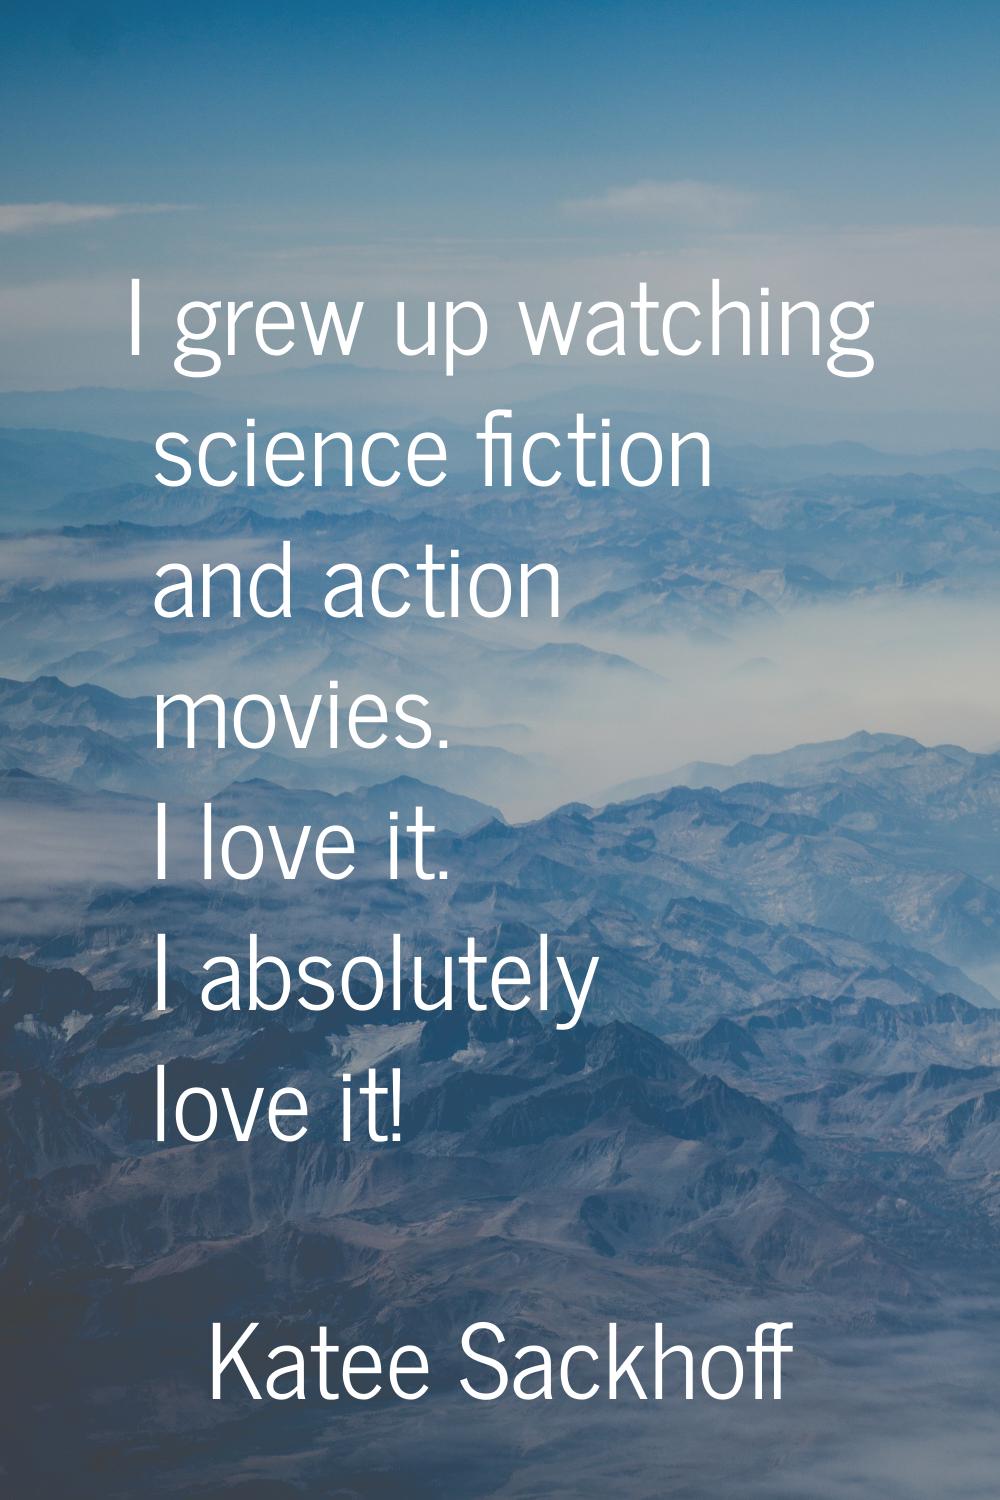 I grew up watching science fiction and action movies. I love it. I absolutely love it!